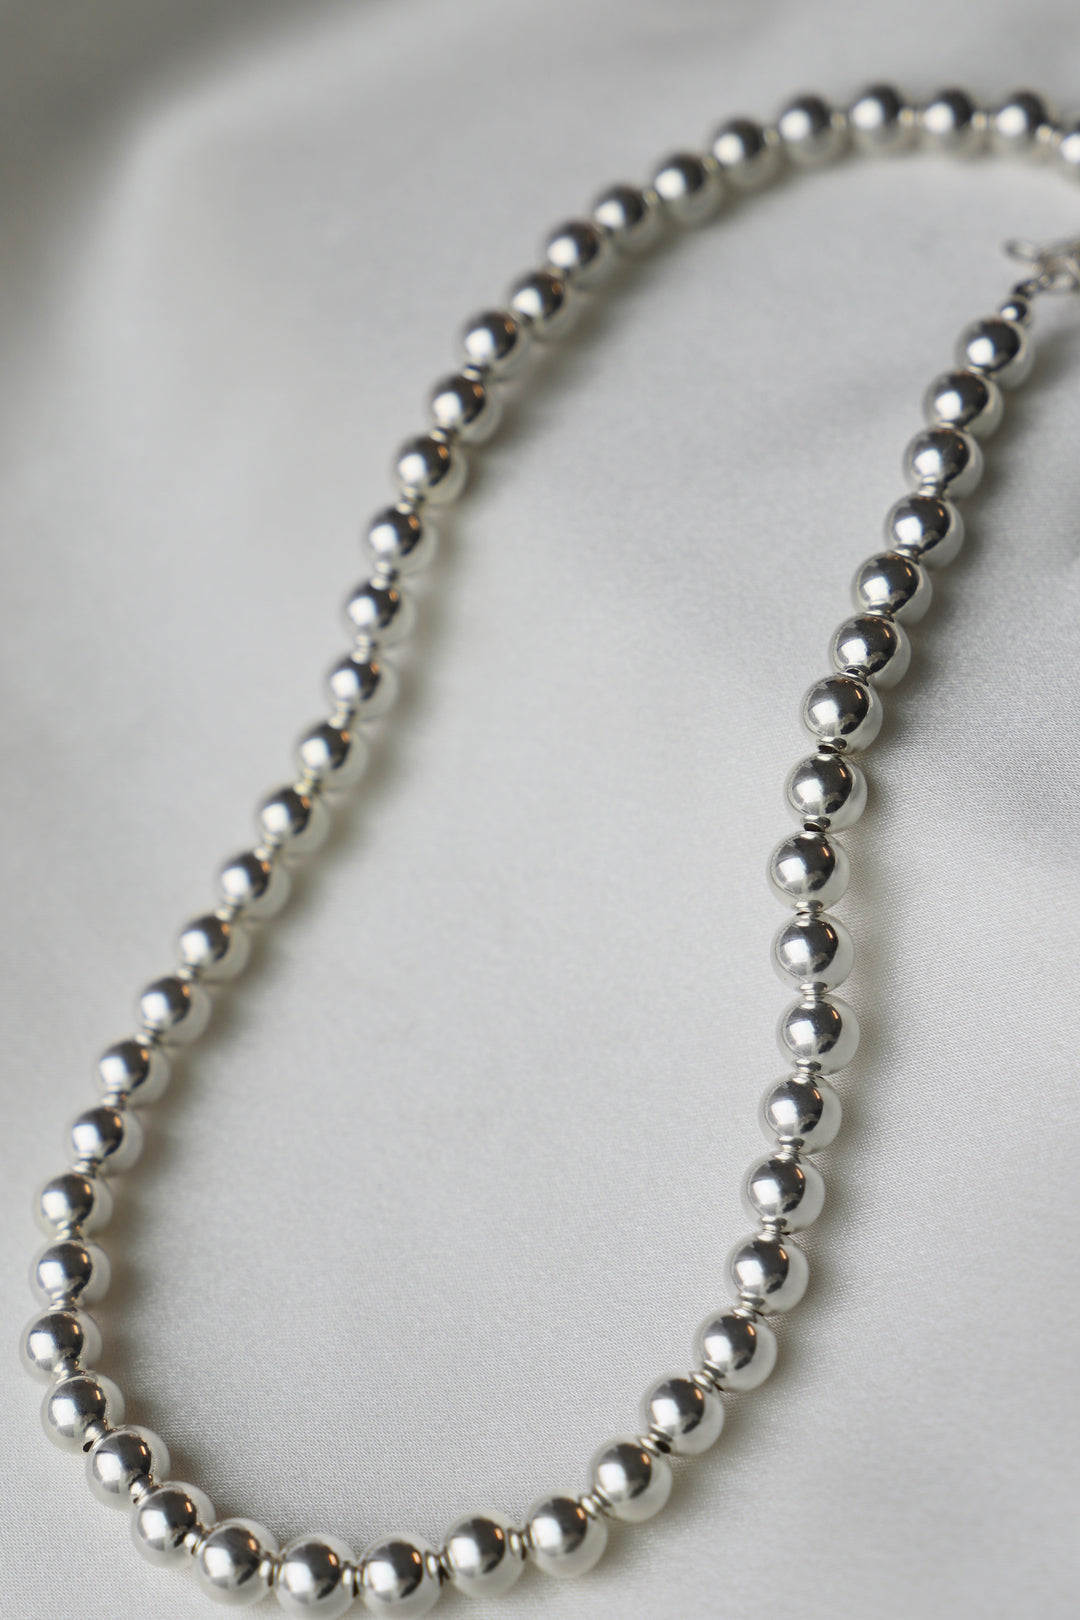 SILVER FILLED 8MM BEADED NECKLACE